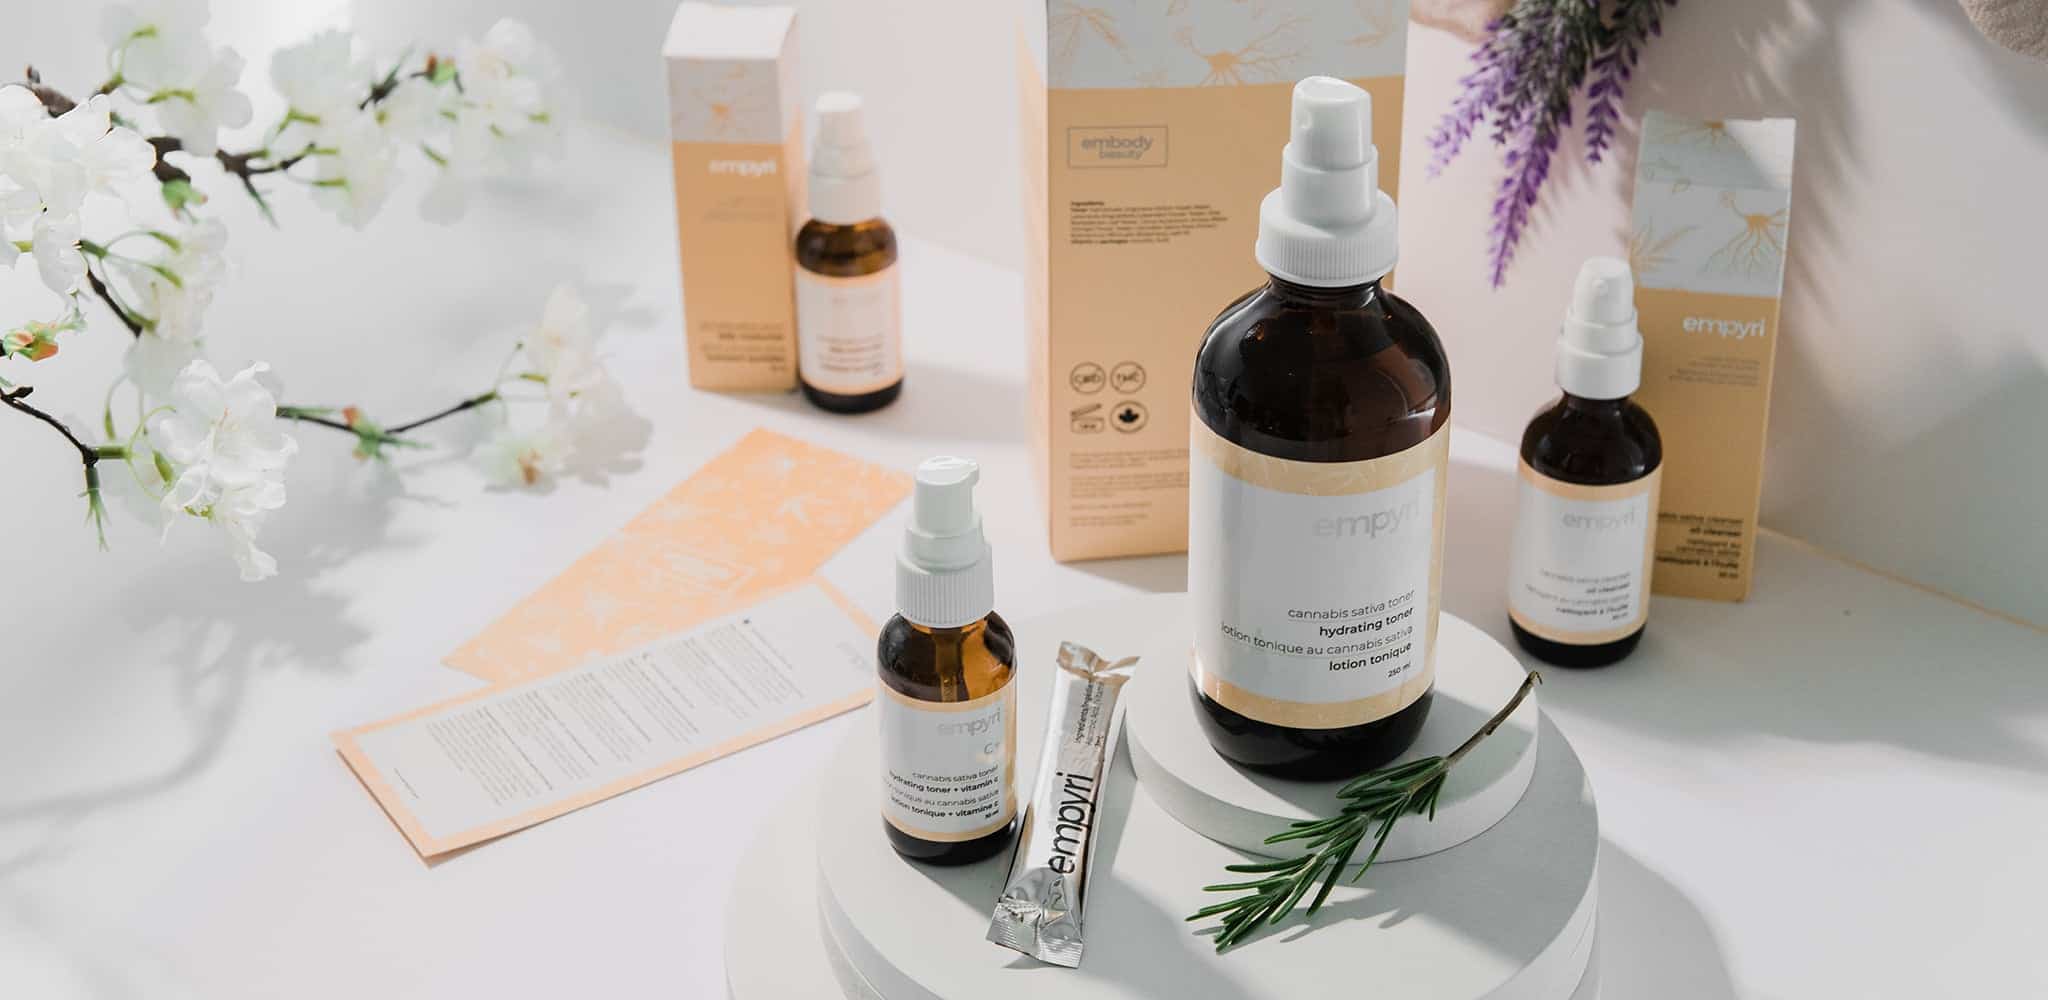 Empyri: A Biochemical Engineer Launches Upcycled Cannabis Root-based Skincare